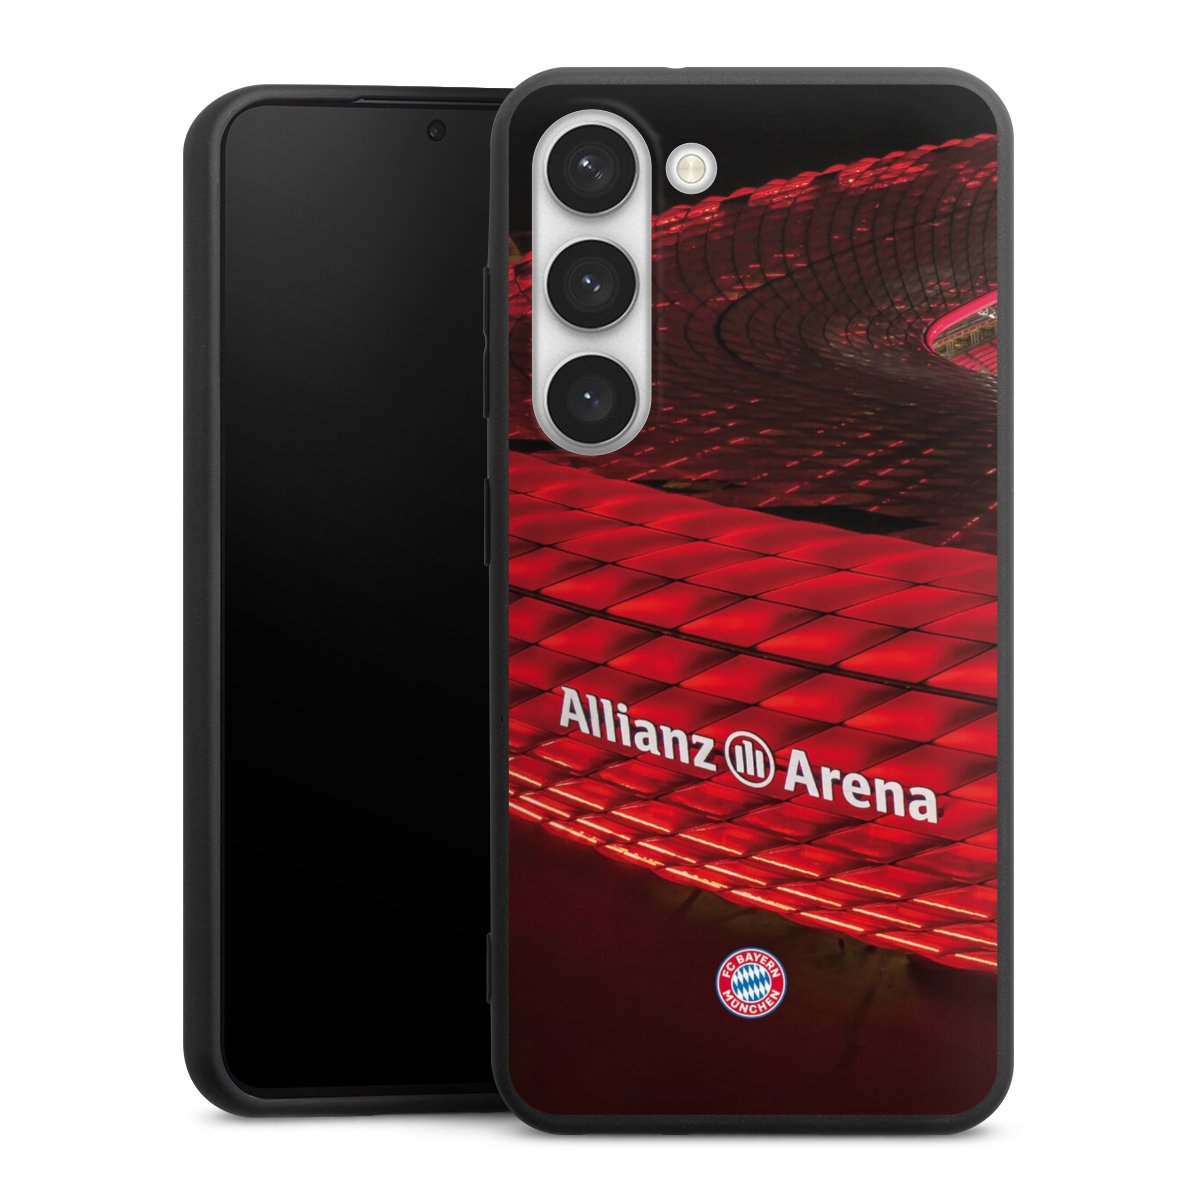 Allianz Arena by Night